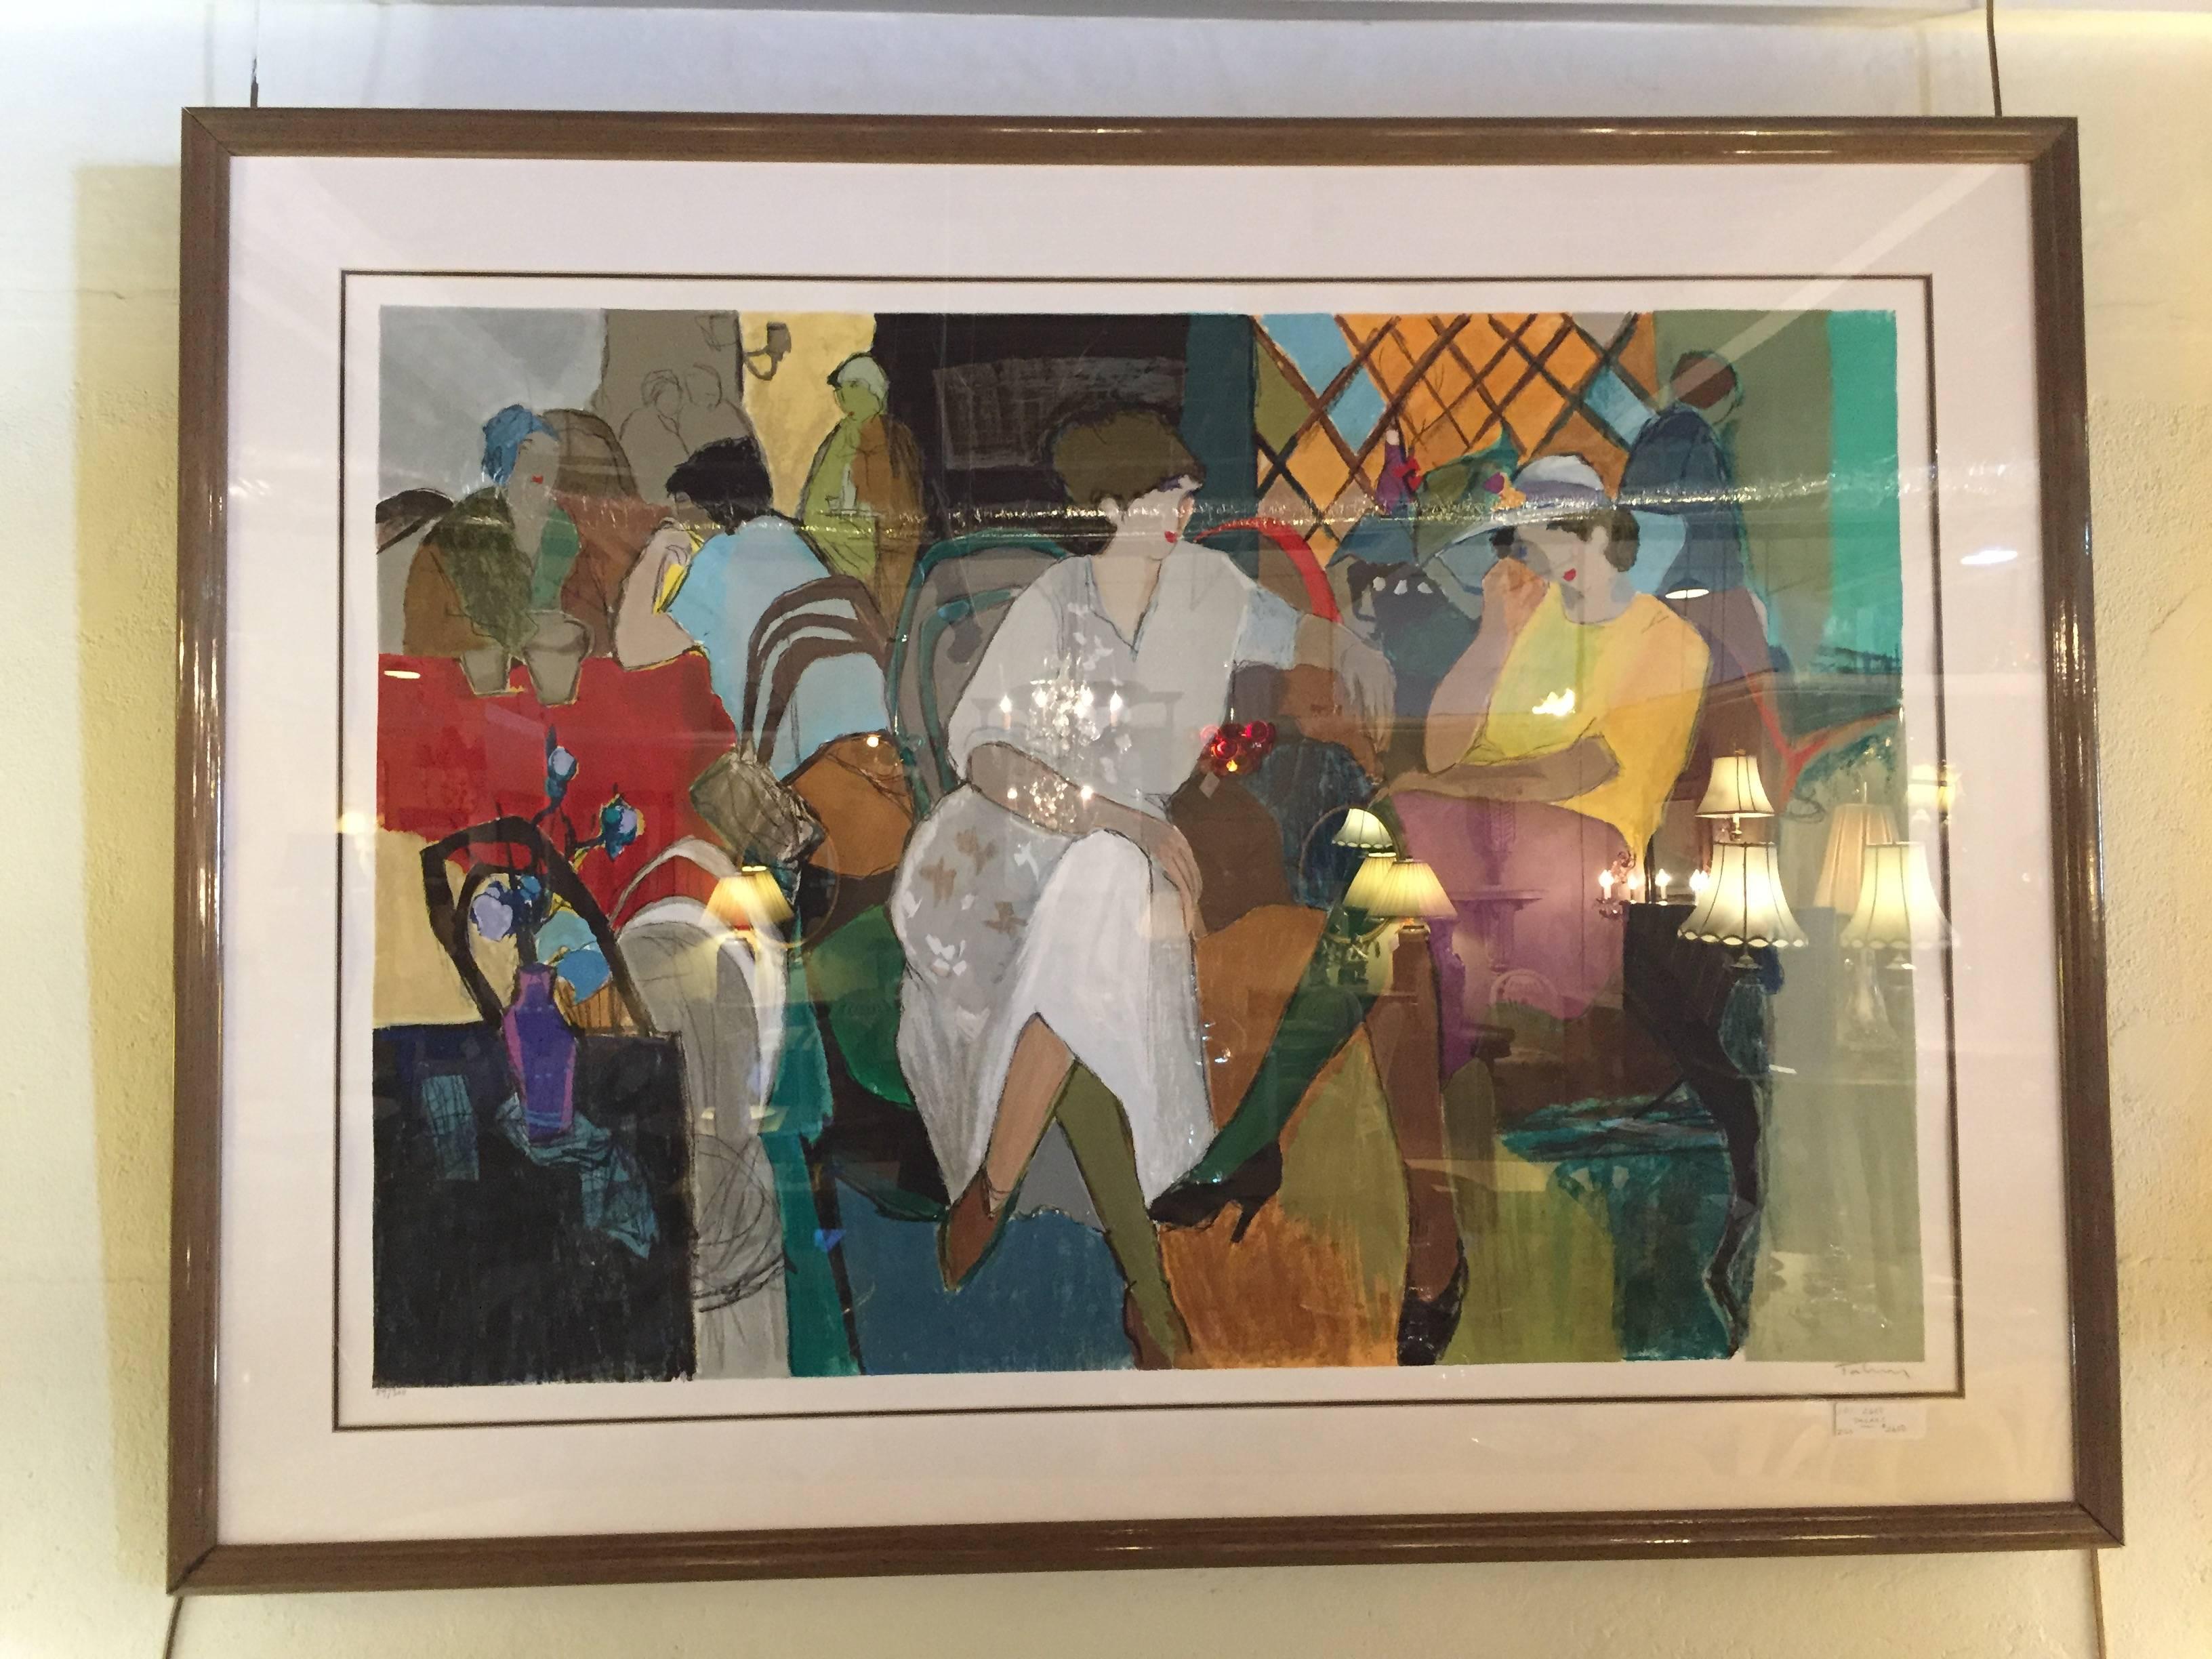 Itzchak Tarkay sillkscreen print Cafe De Paris signed and numbered, 59 of 300.
The piece itself in a gold frame and under glass. Several woman dressed in Art Deco clothing sitting at tables in the Café.
Itzchak Tarkay. Itzchak Tarkay (1935-June 3,